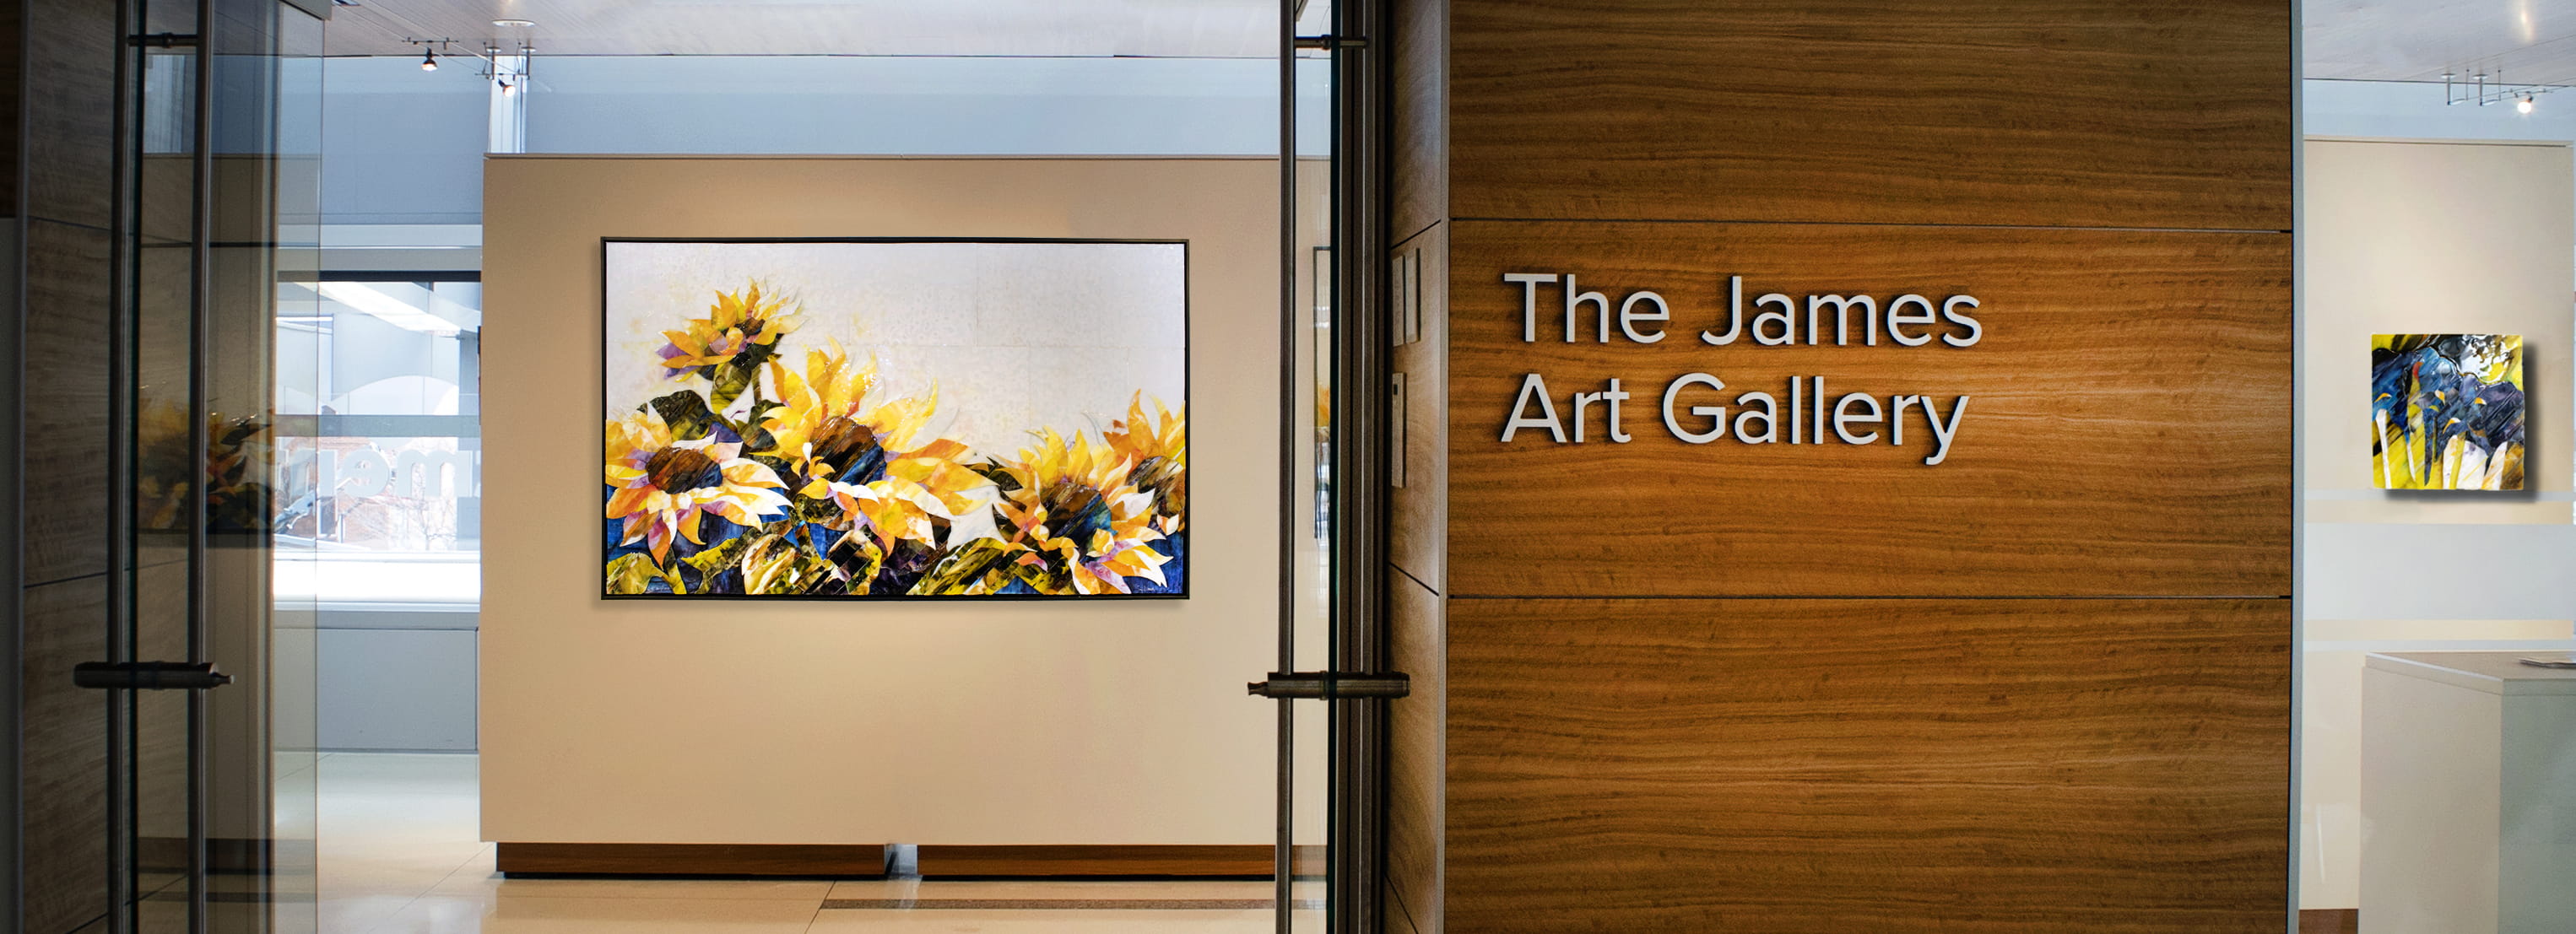 The James Art Gallery Exhibition